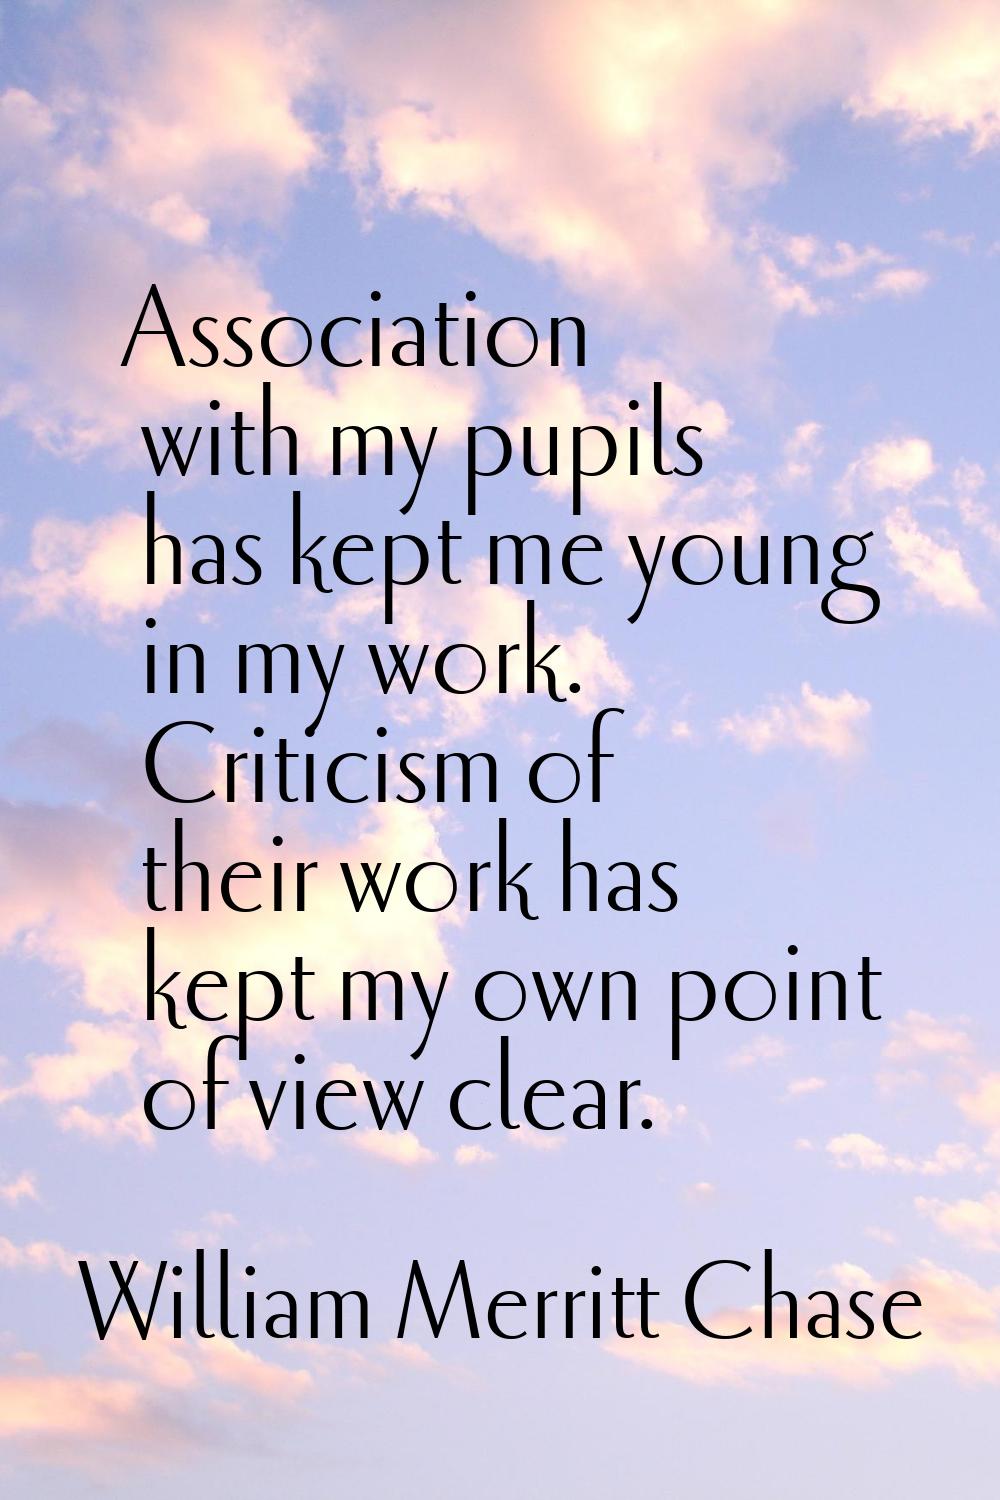 Association with my pupils has kept me young in my work. Criticism of their work has kept my own po